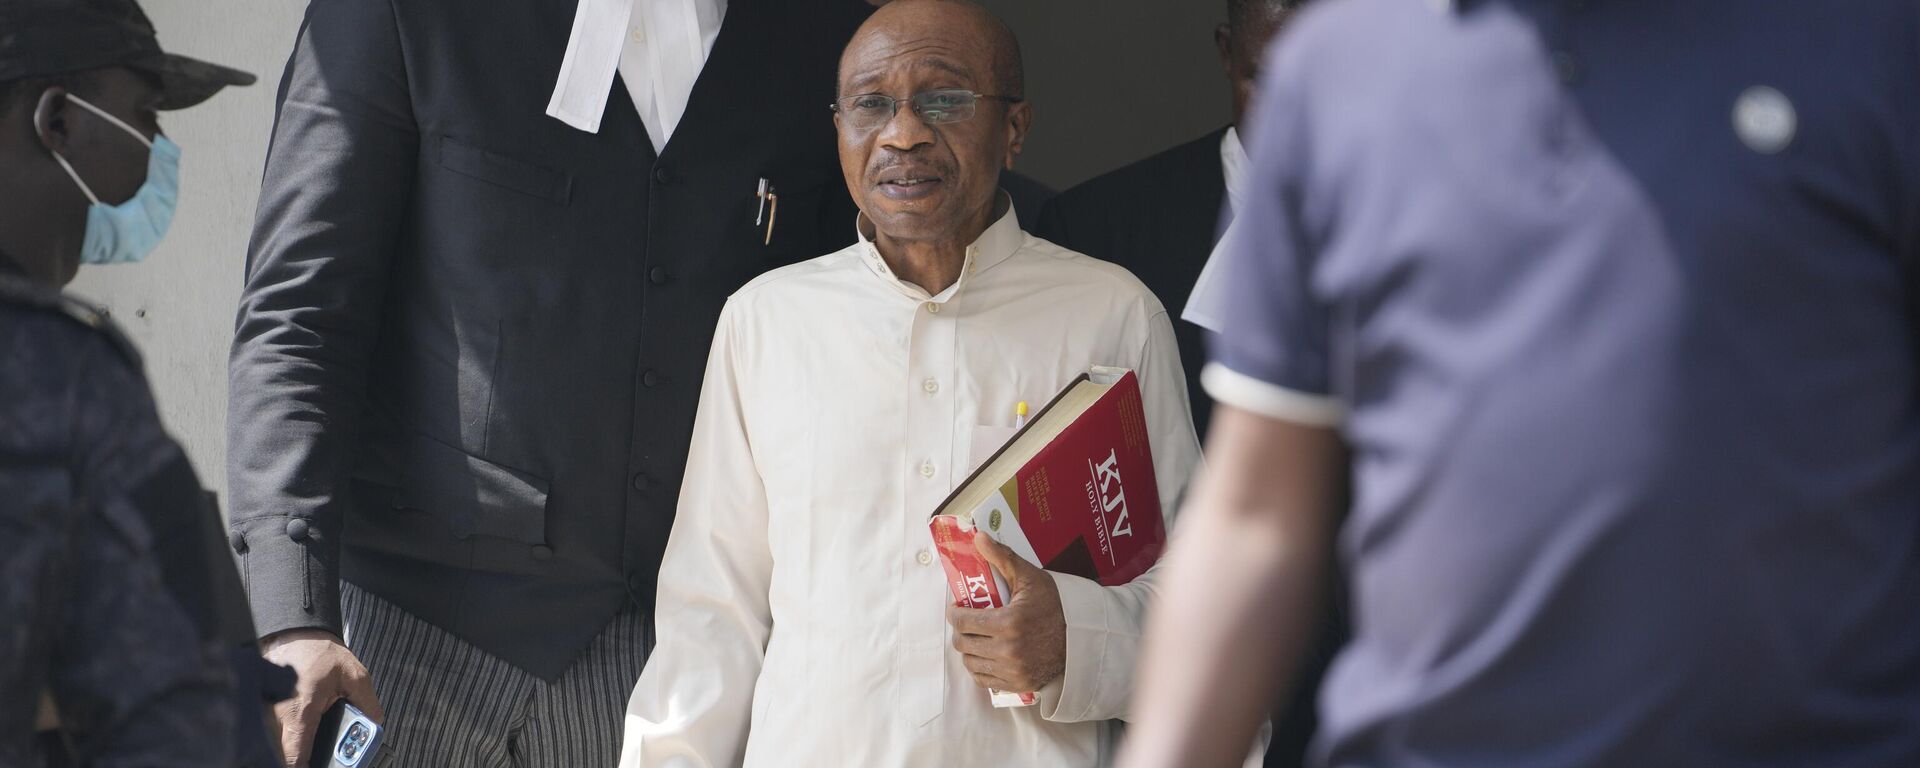 Godwin Emefiele, suspended Central Bank governor, leaves after a court hearing at the Federal High Court in Lagos Nigeria - Sputnik Africa, 1920, 23.11.2023